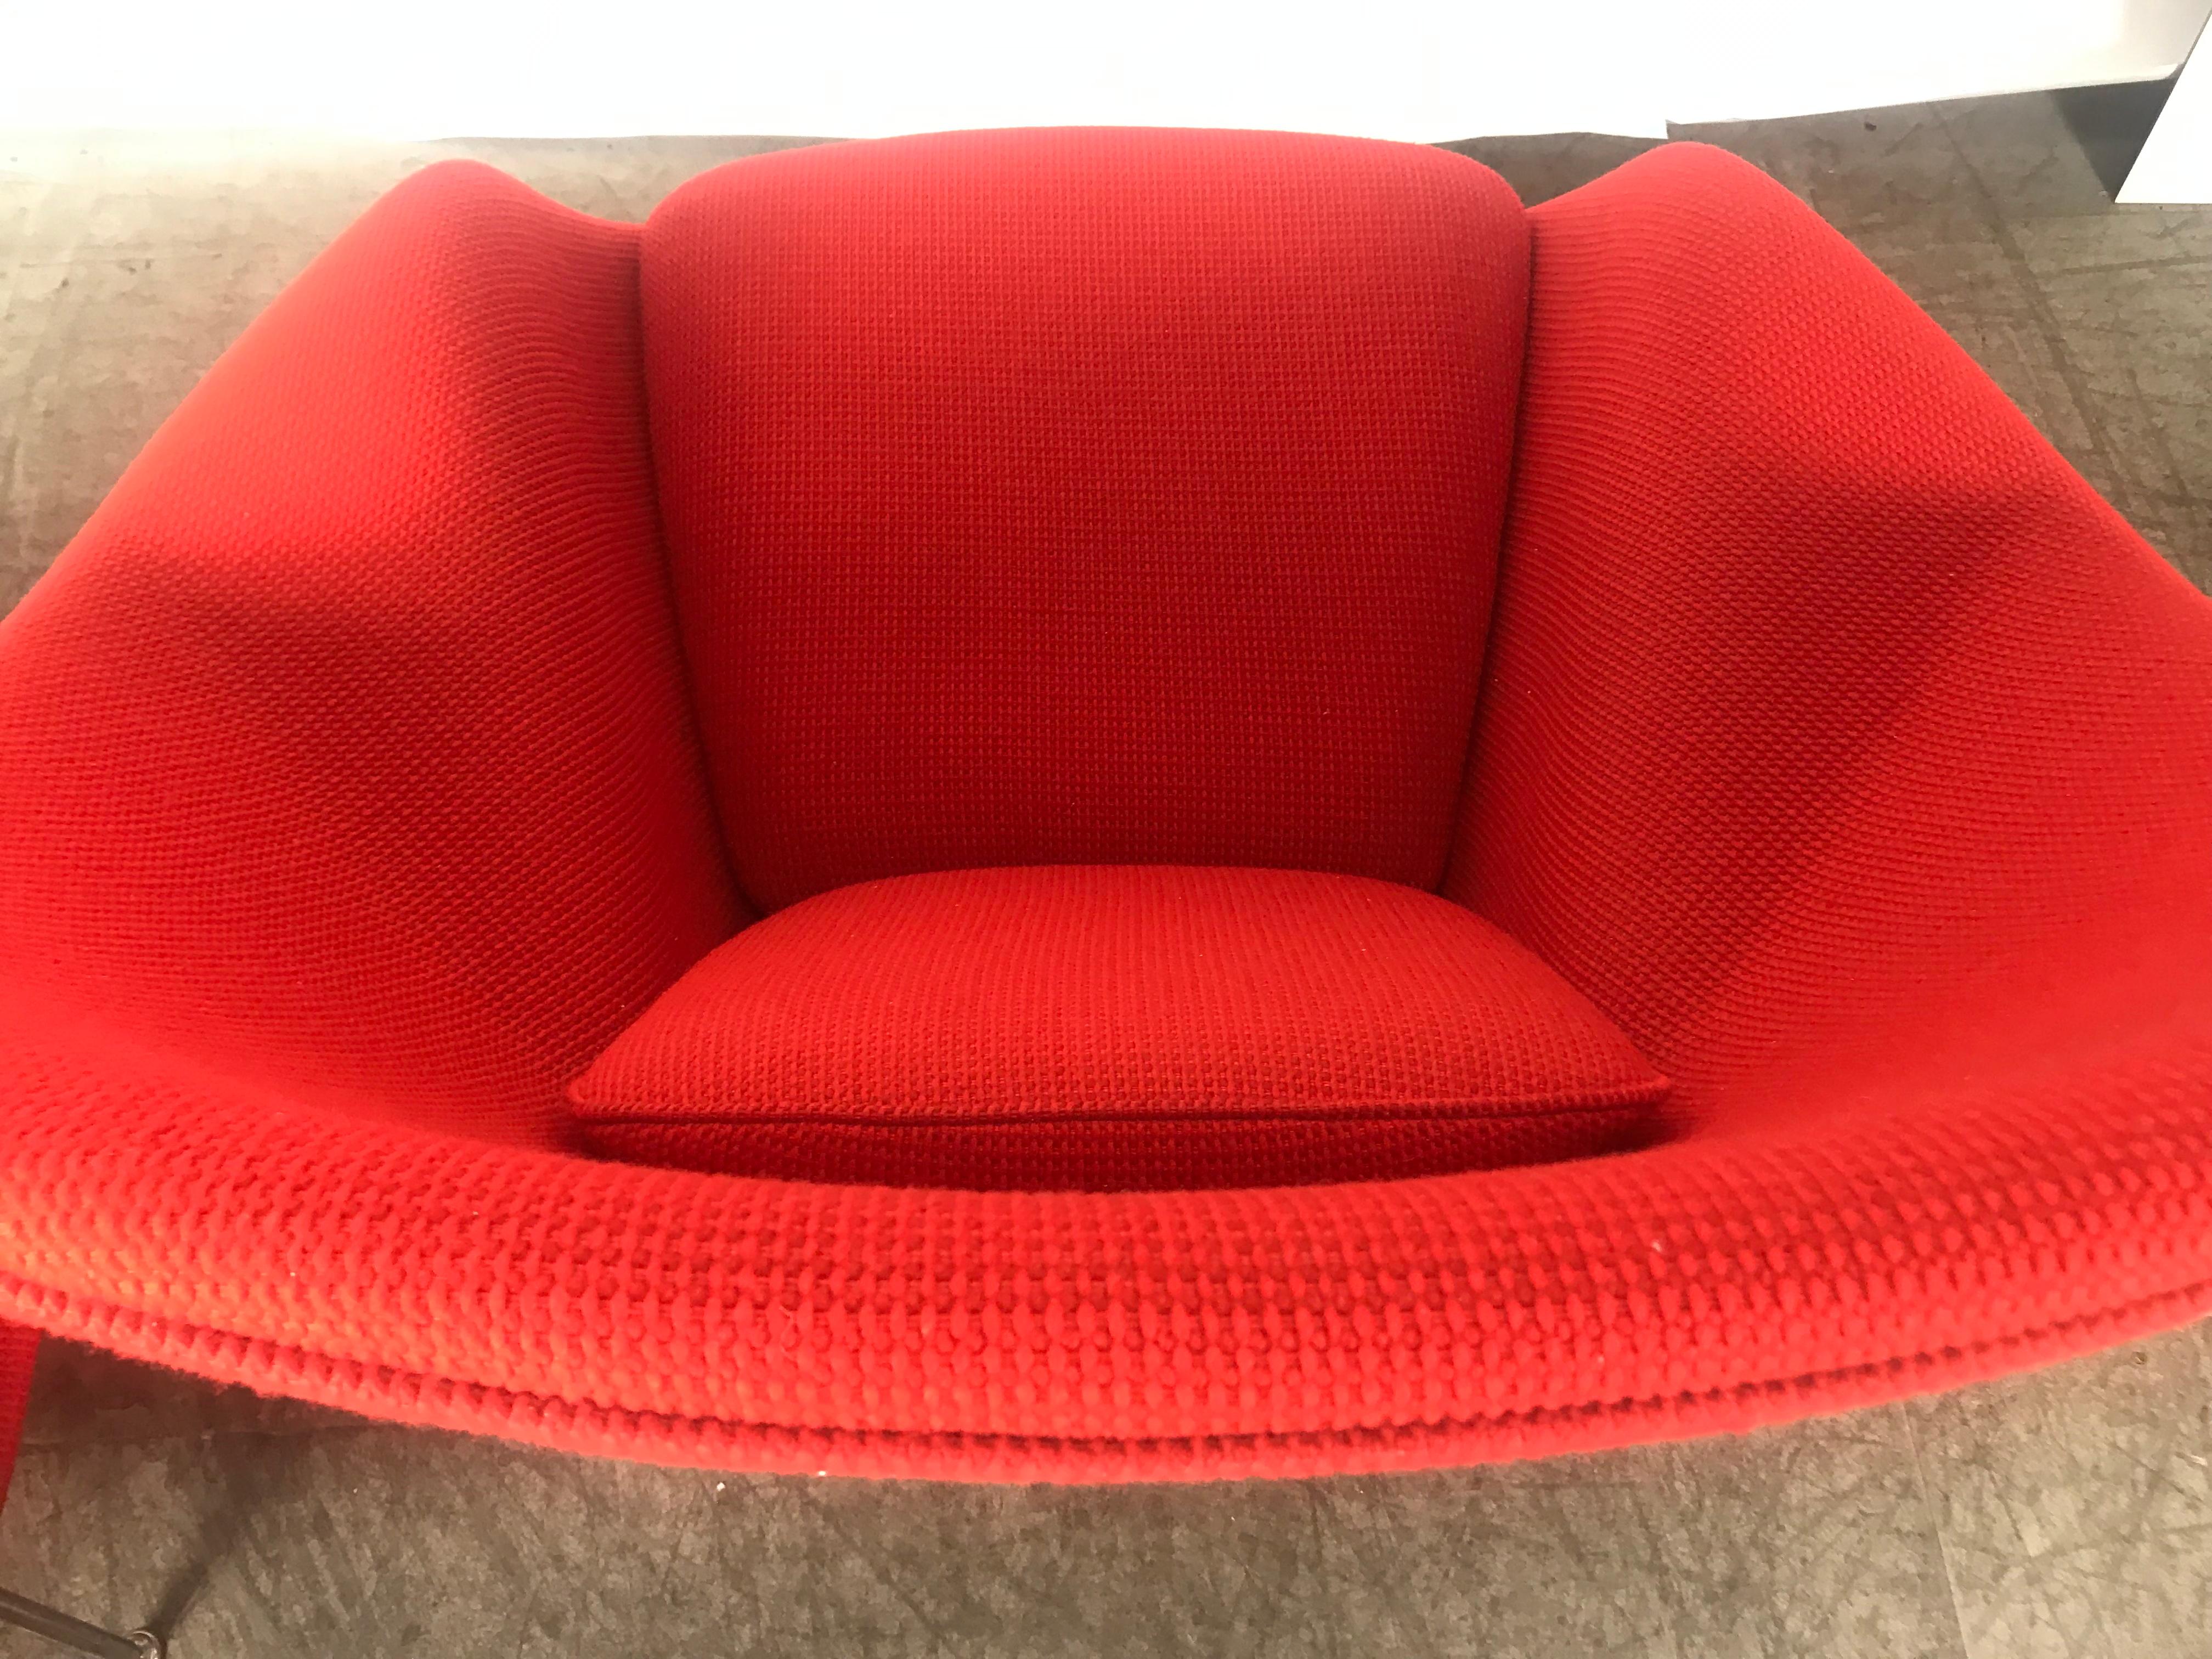 Iconic and Classic. this sculpturally designed Womb chair and accompanying ottoman is designed by famed Finnish ,American designer Eero Saarinen and produced by Knoll. The chair and ottoman retain their original red Crimson fabric. Amazing original